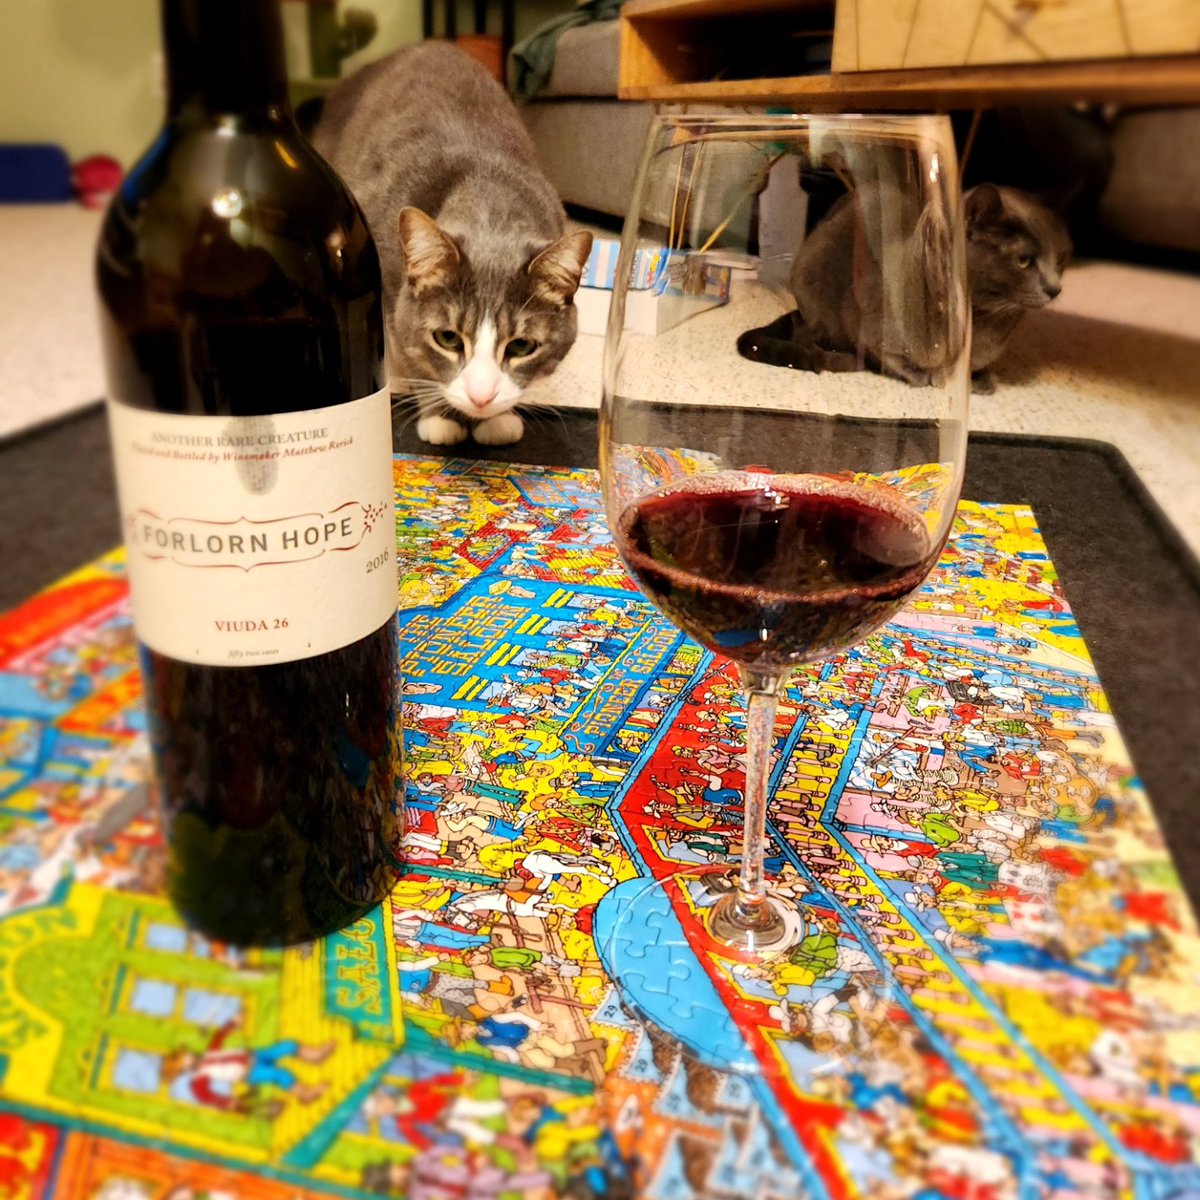 Spain inspired 🍷blend of Graciano +Tempranillo🍇 Sultry and compex instagram.com/p/C152FDRL0_8/… #wine #winelover @CaraMiaSG @_drazzari @Friscokid49 @frankstero @TweetaDean @thewinetattoo @pietrosd @forkmespoonme @rr_pirate @cccjoe @dpen_cc @SLBriscoe @damewine @winewankers @LadyCWine